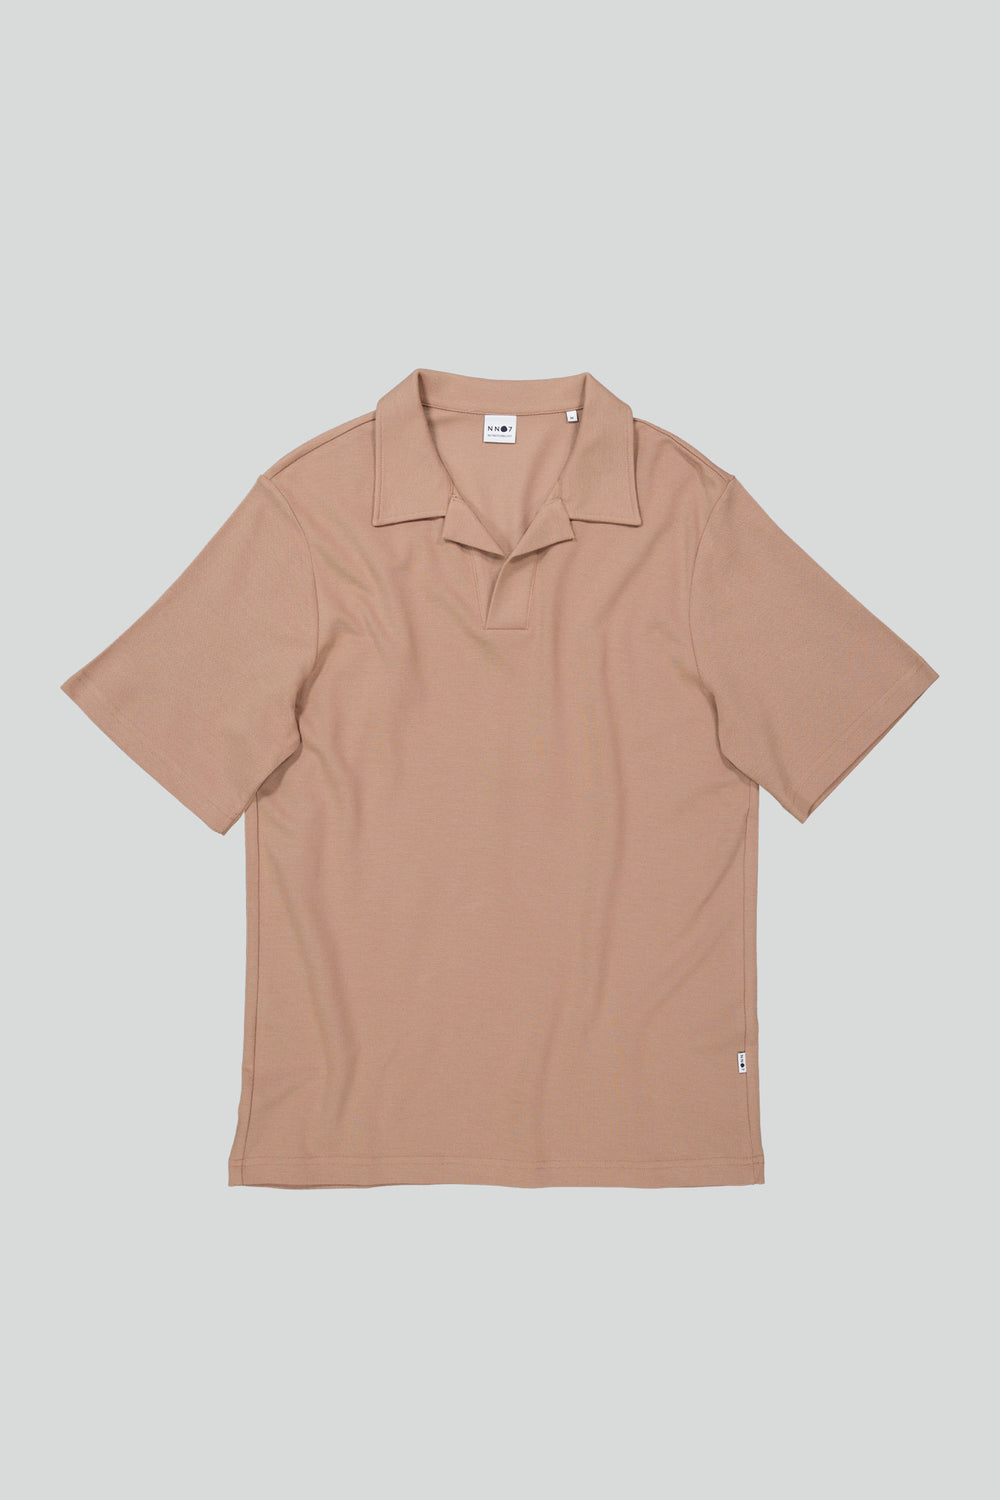 NN07 - Ross SS Polo 3463 Polo in Nougat | Buster McGee